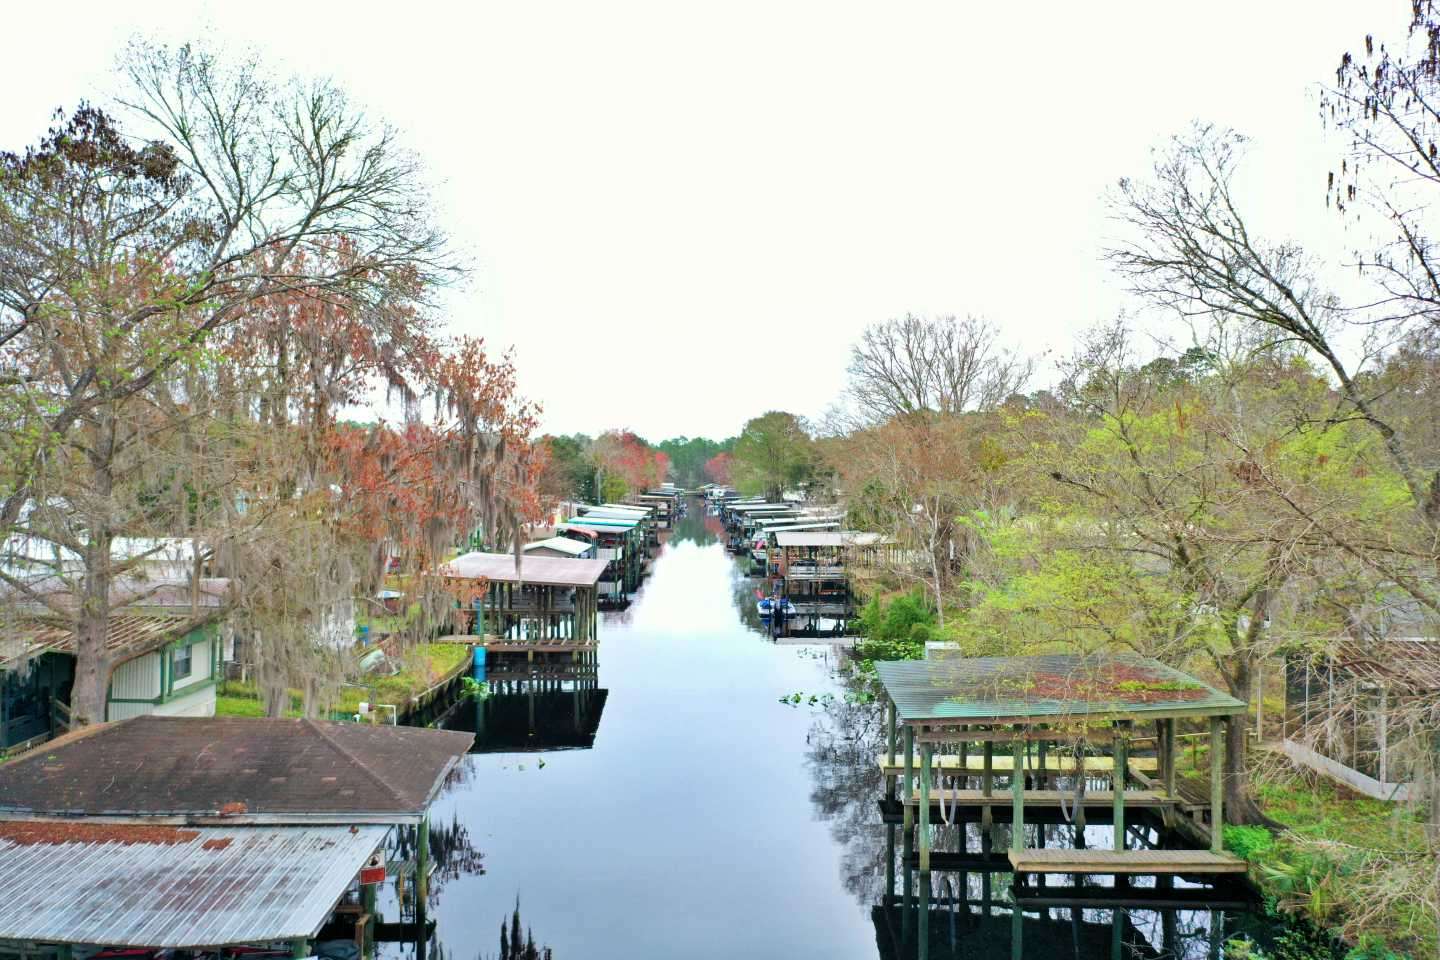 Stretching between the U.S. Hwy. 17 bridge and the entrance to Crescent is Dunnâs Creek, itâs canals and old fish camps providing a glimpse of âold Florida.â 